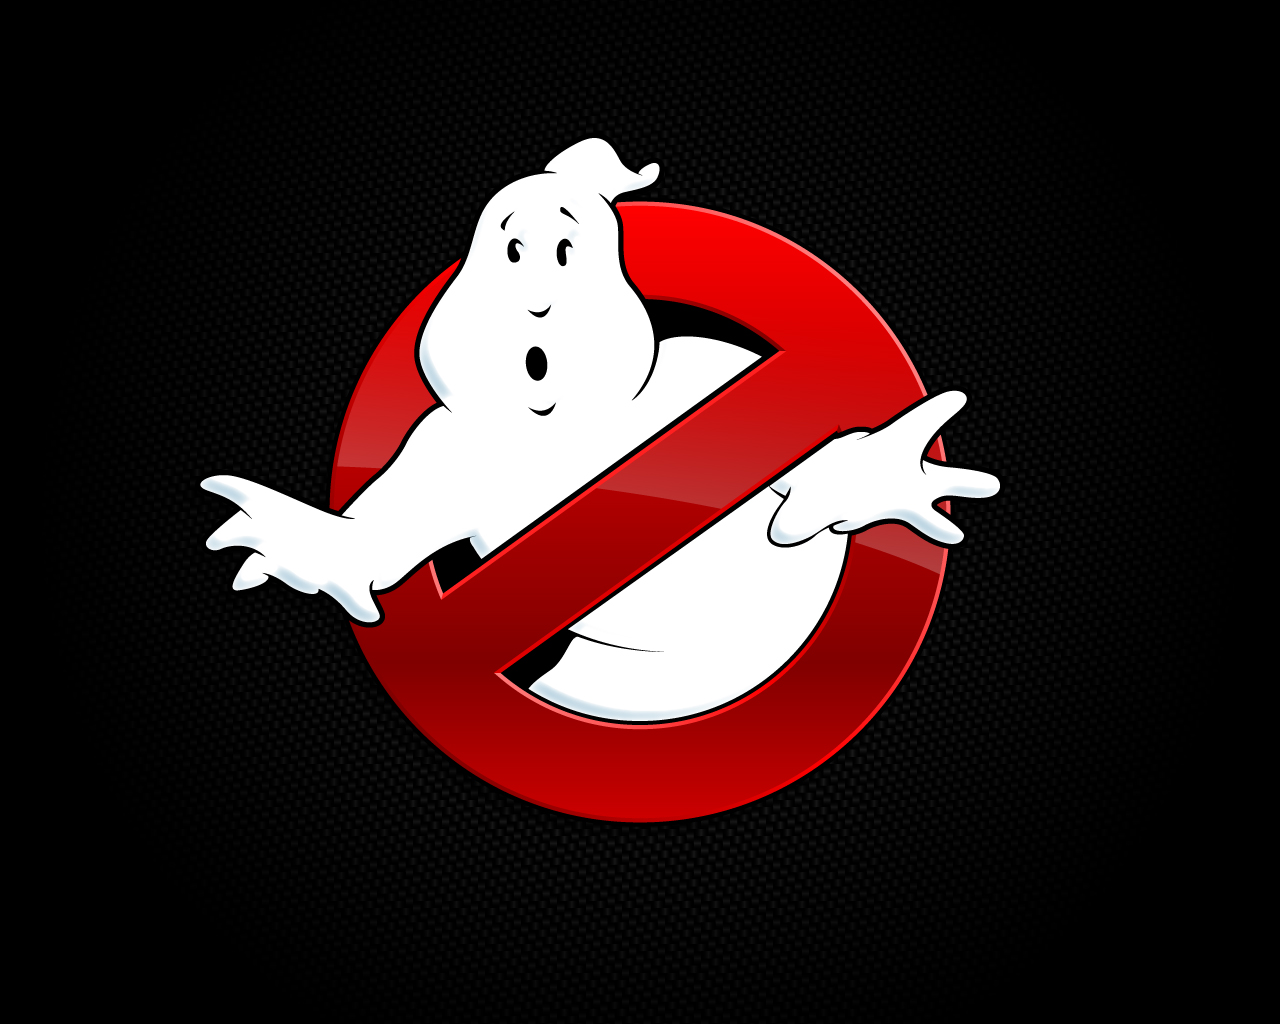 Ghostbusters HD Phone Wallpapers  Wallpaper Cave